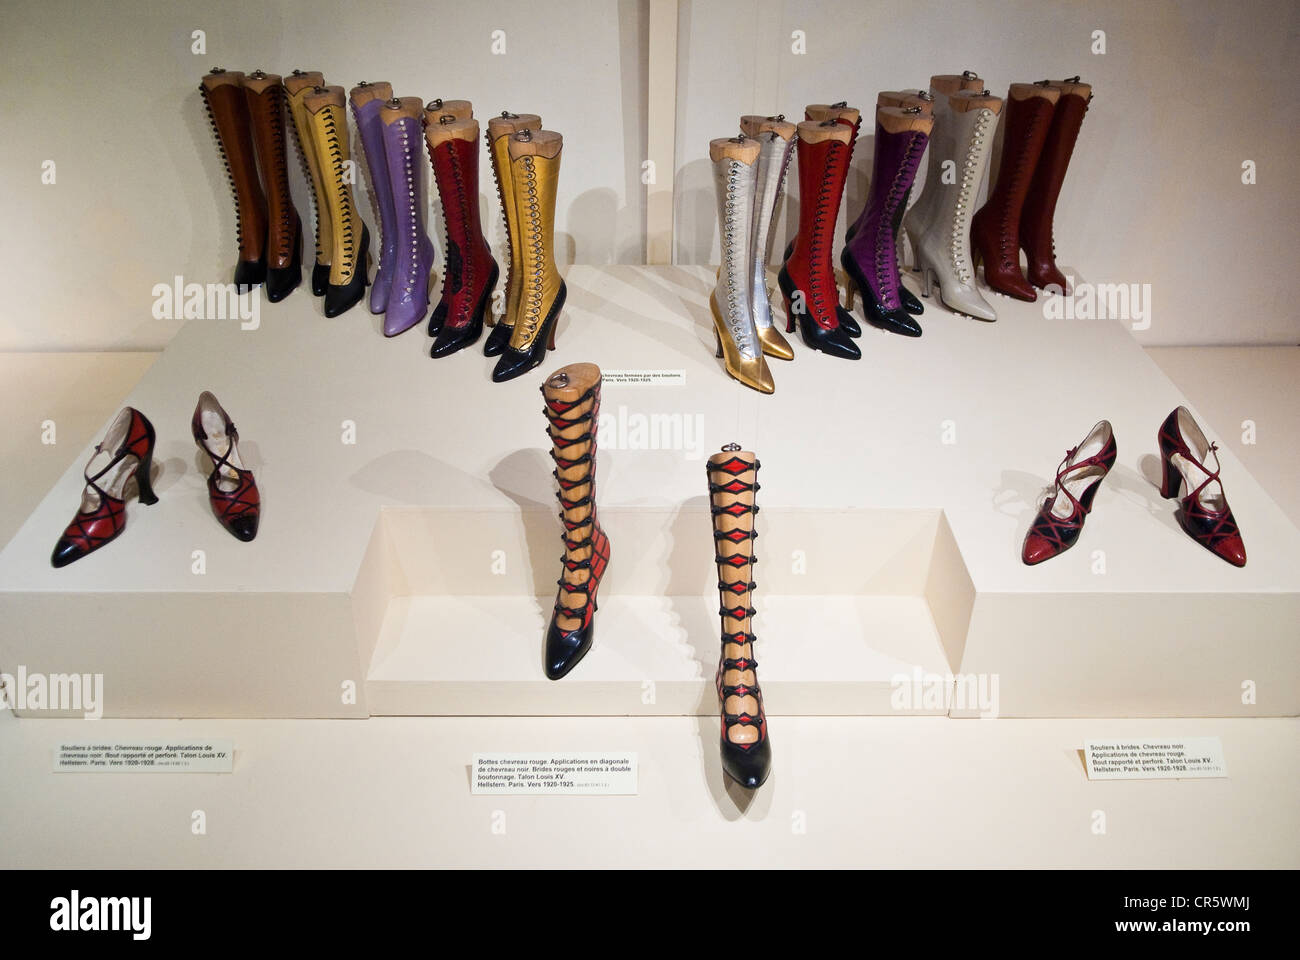 France, Drome, Romans sur Isere, inside the Musee International de Chaussure  (International Museum of shoes), compulsory mention Stock Photo - Alamy